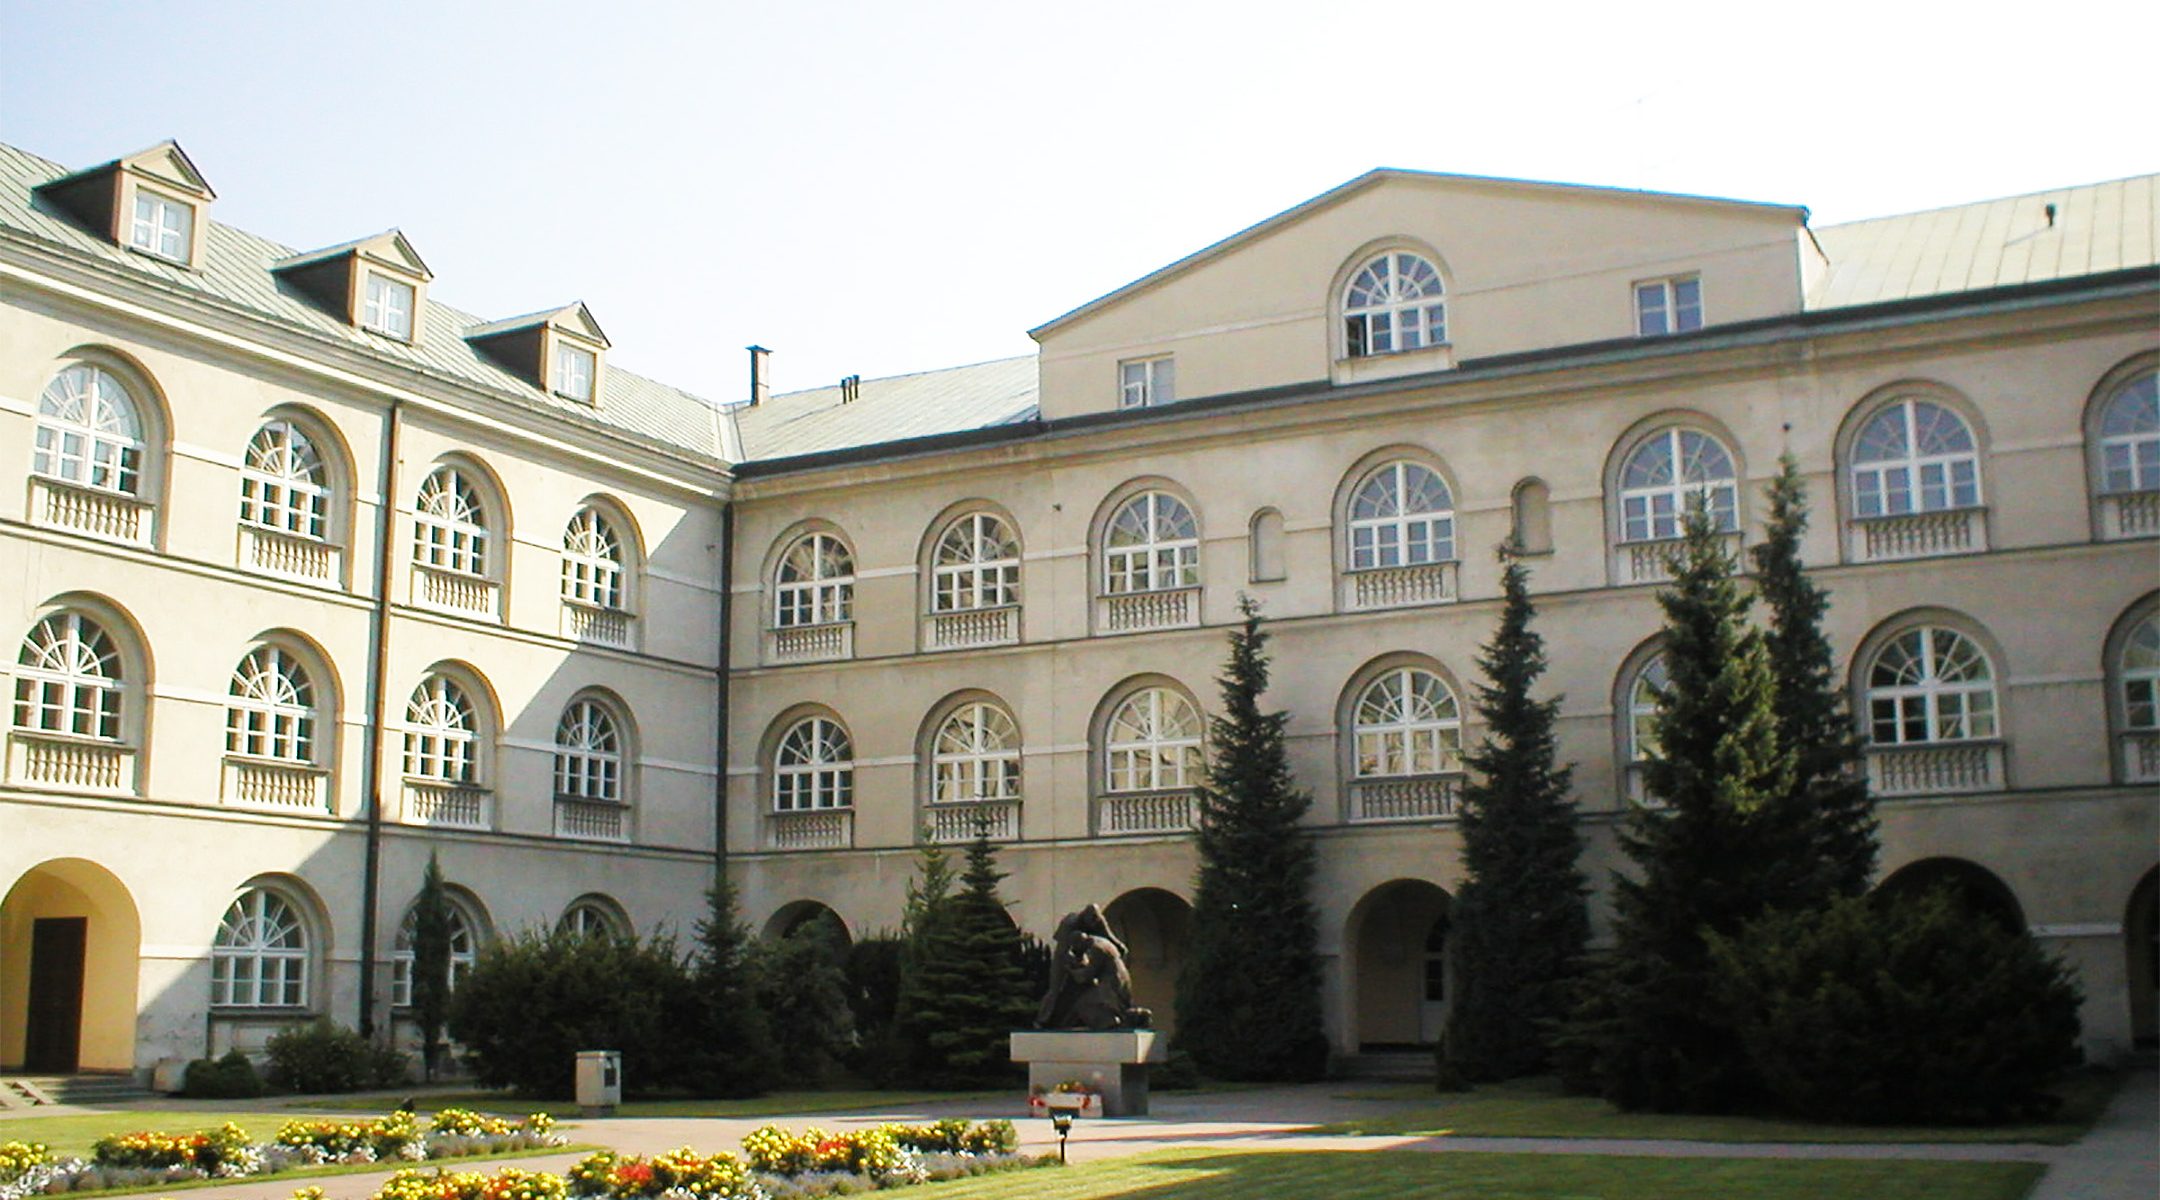 The Catholic Universoty of Lublin. (Wikimedia Commons)